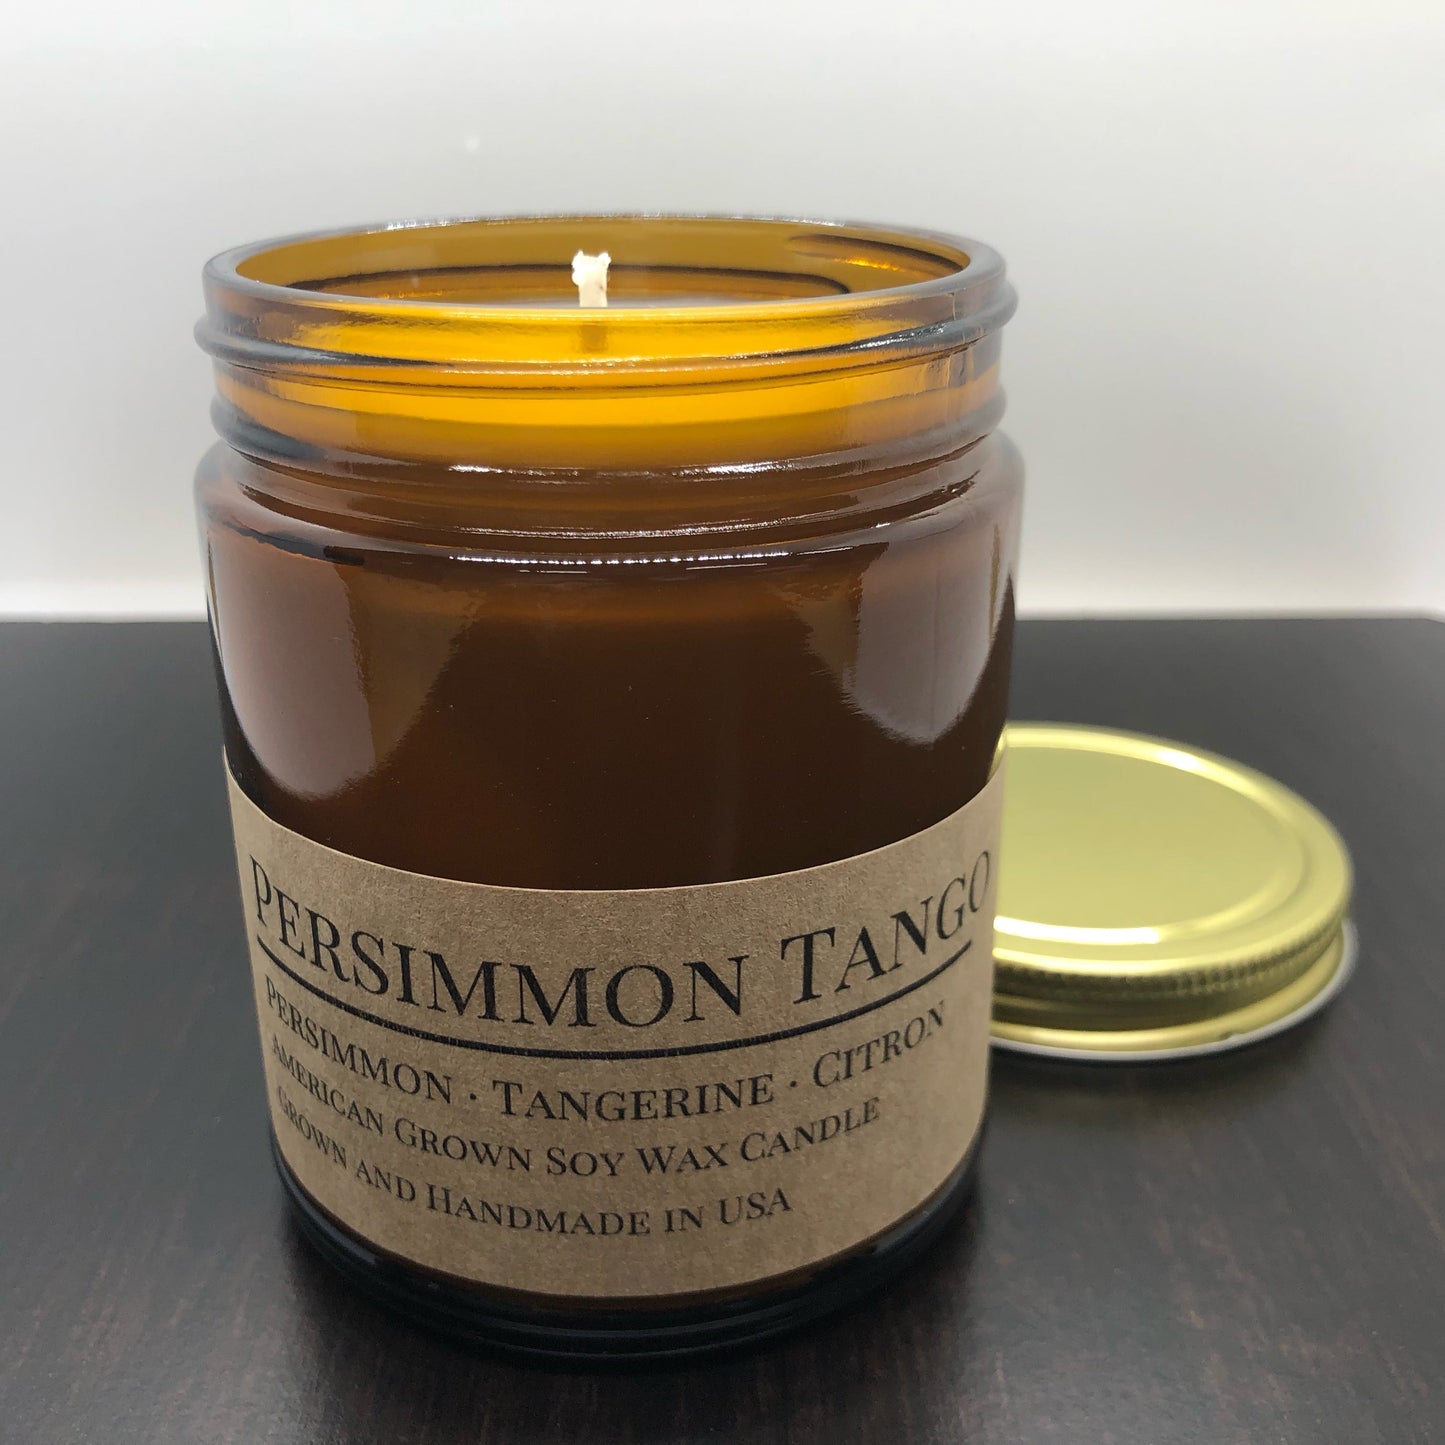 Persimmon Tango Soy Candle | 9 oz Amber Apothecary Jar